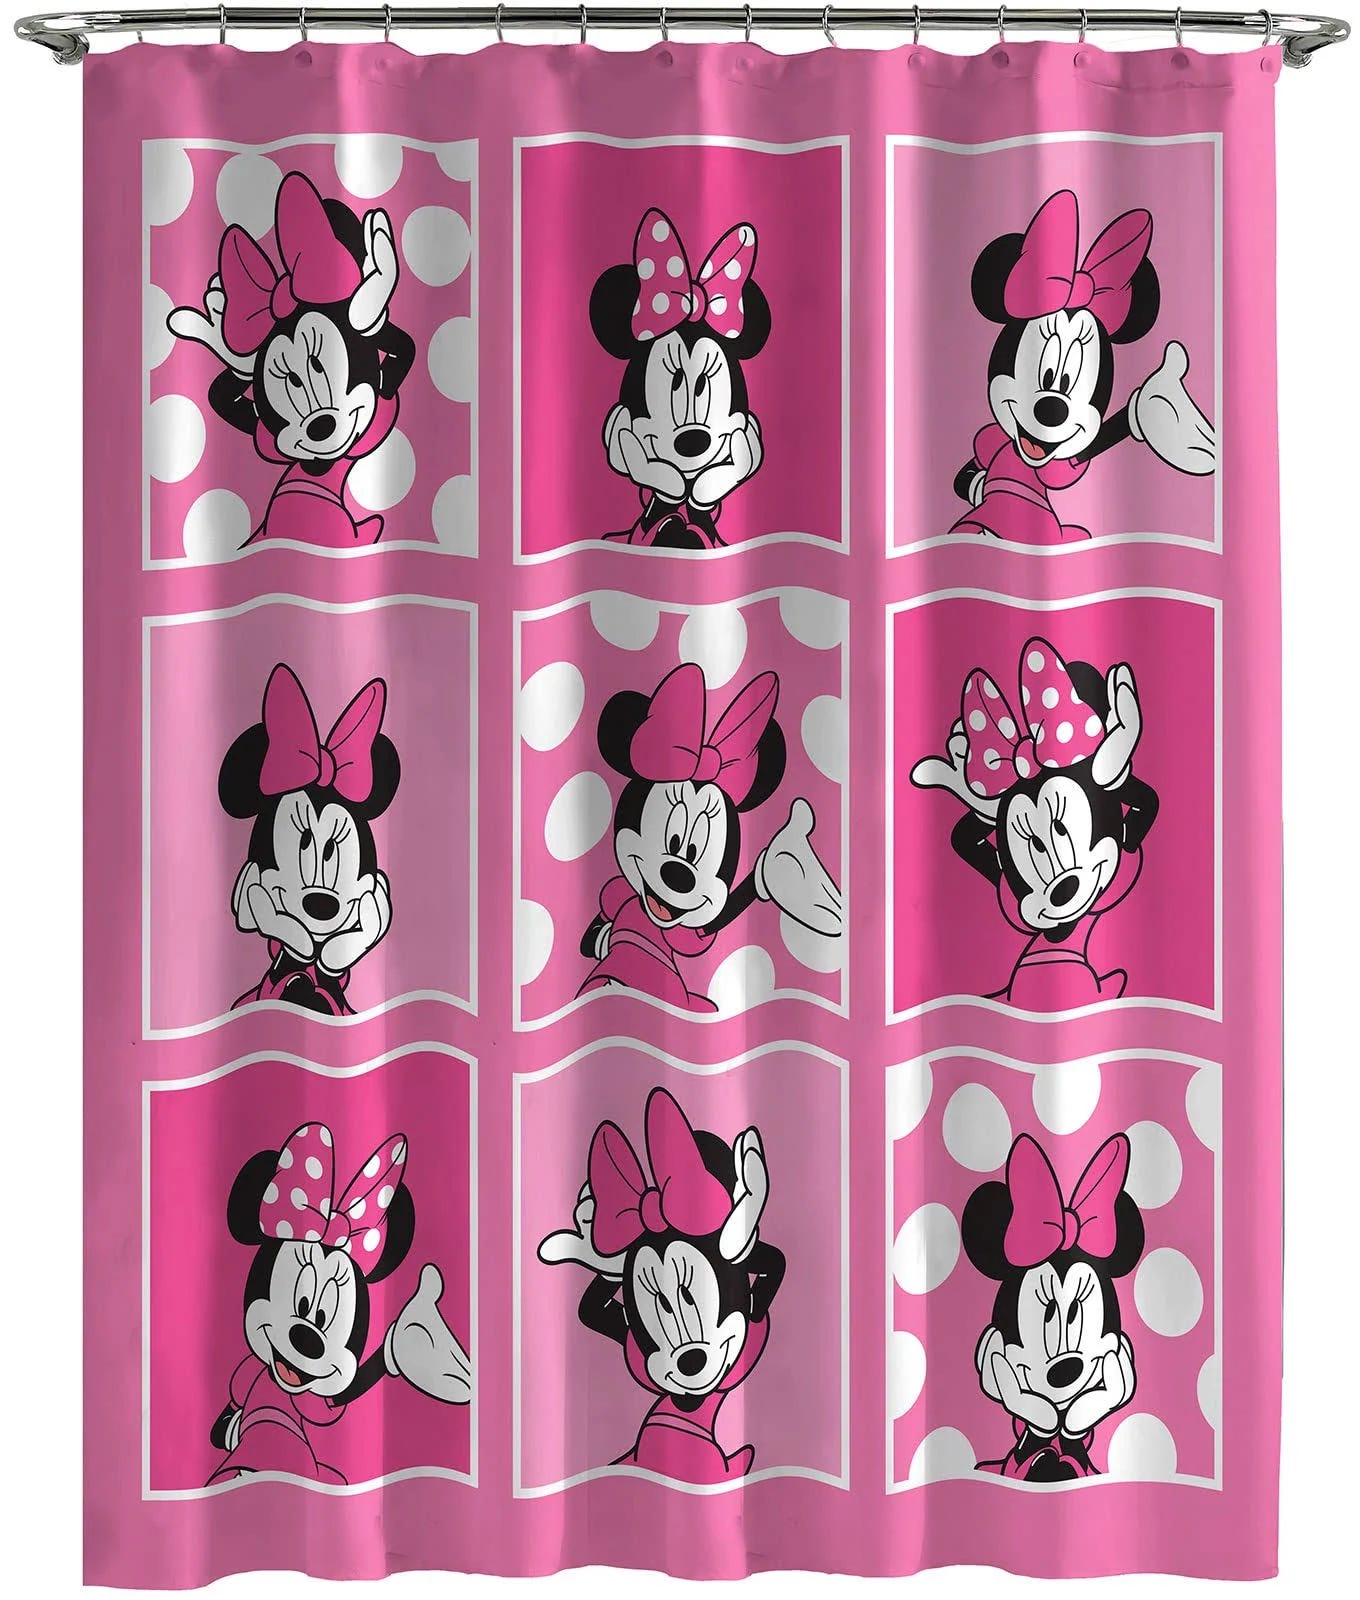 Cute Minnie Mouse Discount Shower Curtain | Image